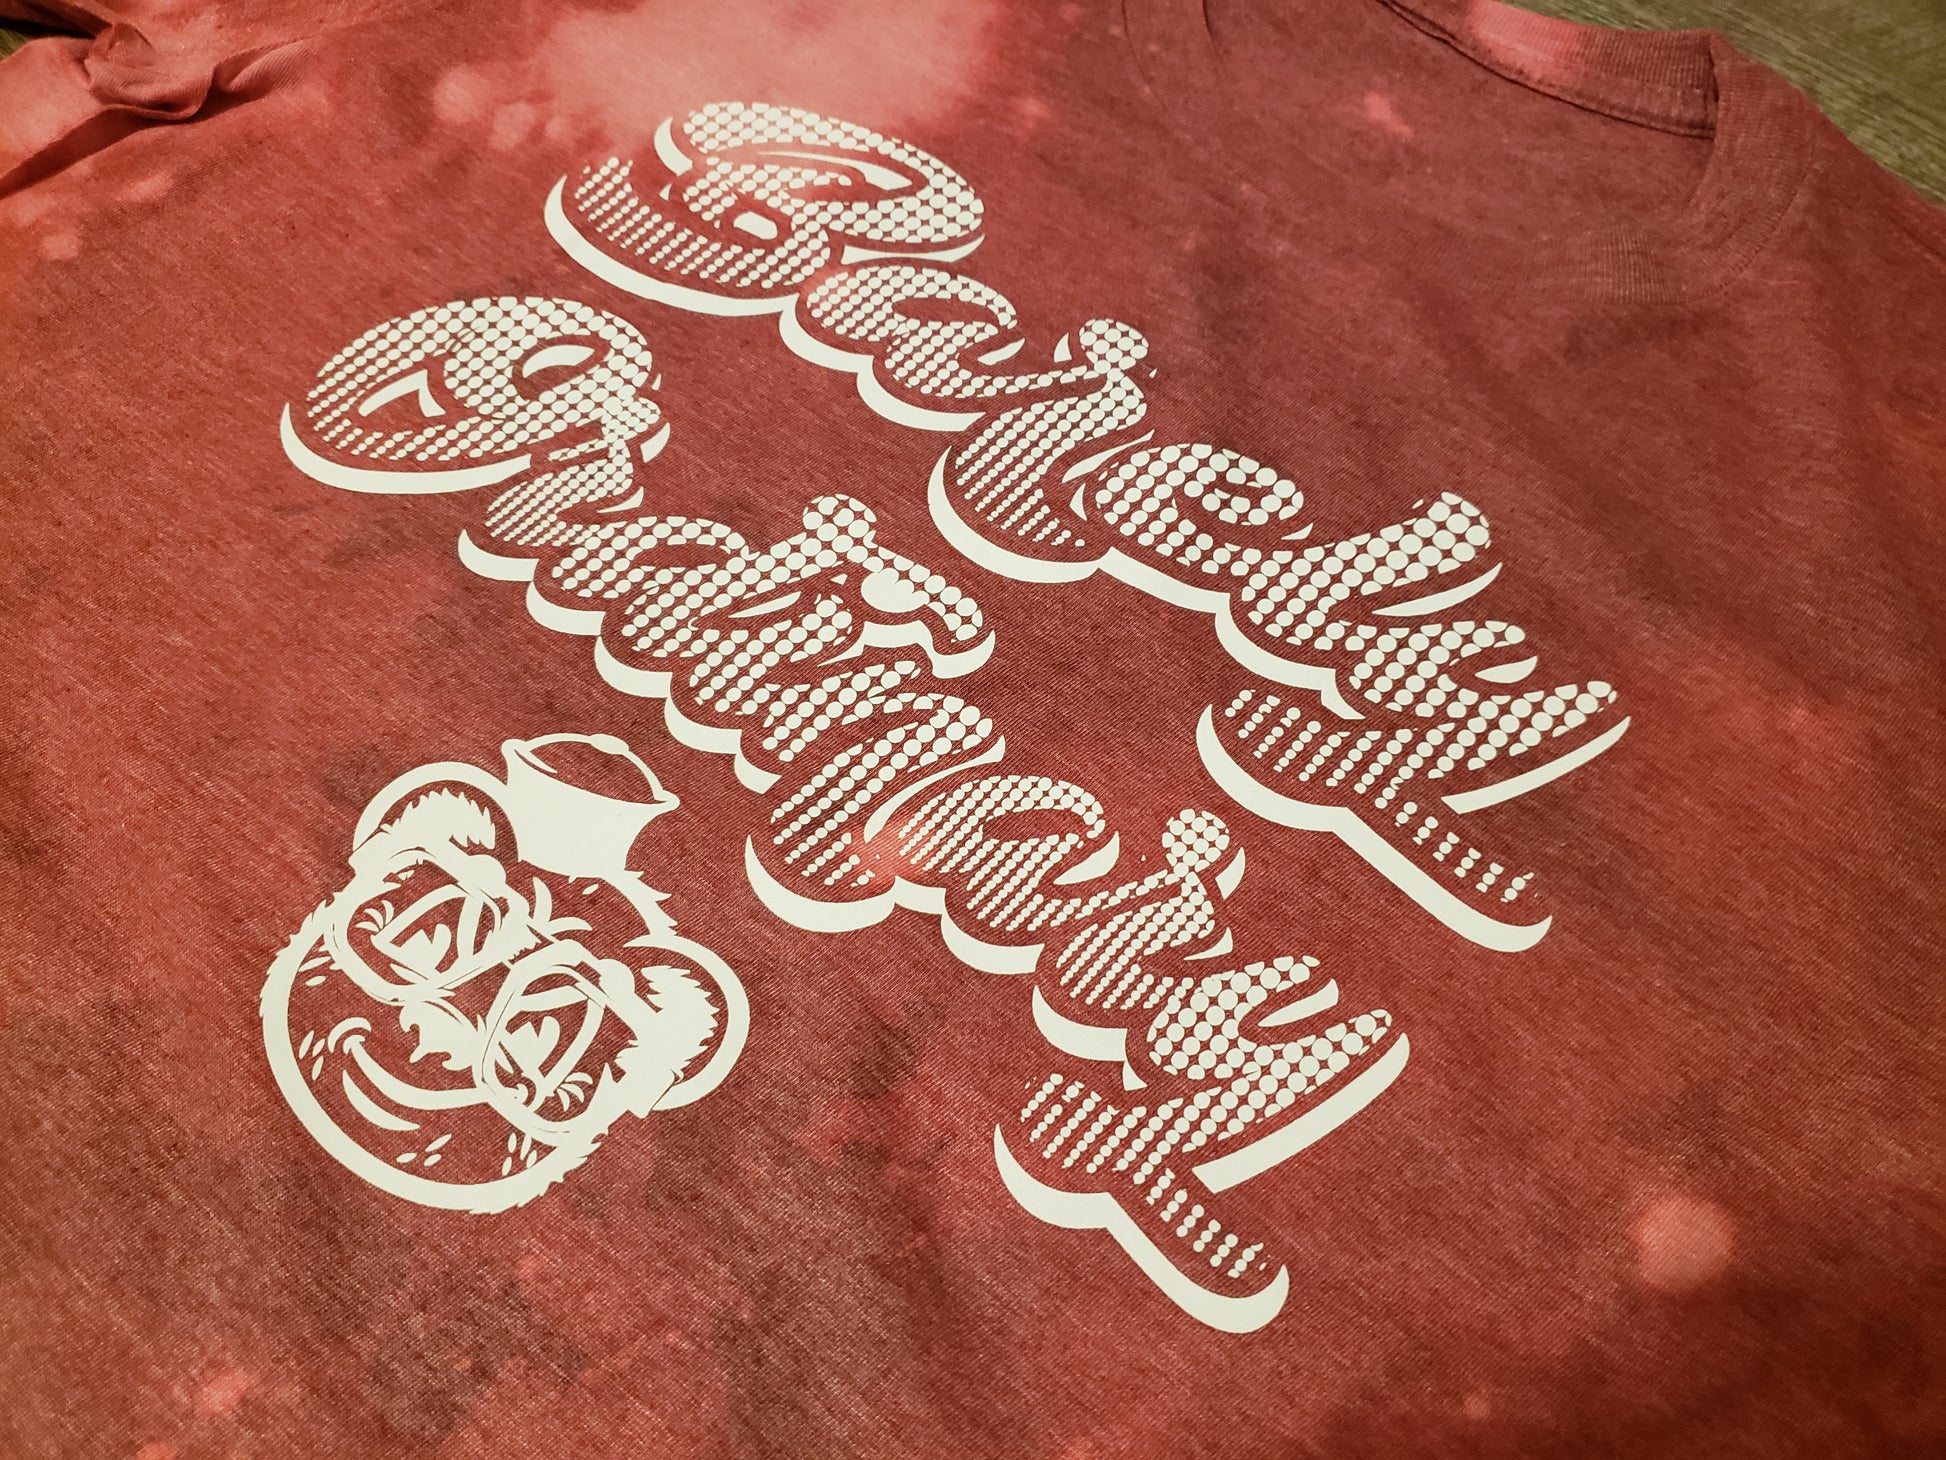 Barely "Bleached Spotted Logo" Tee - Barely Ordinary